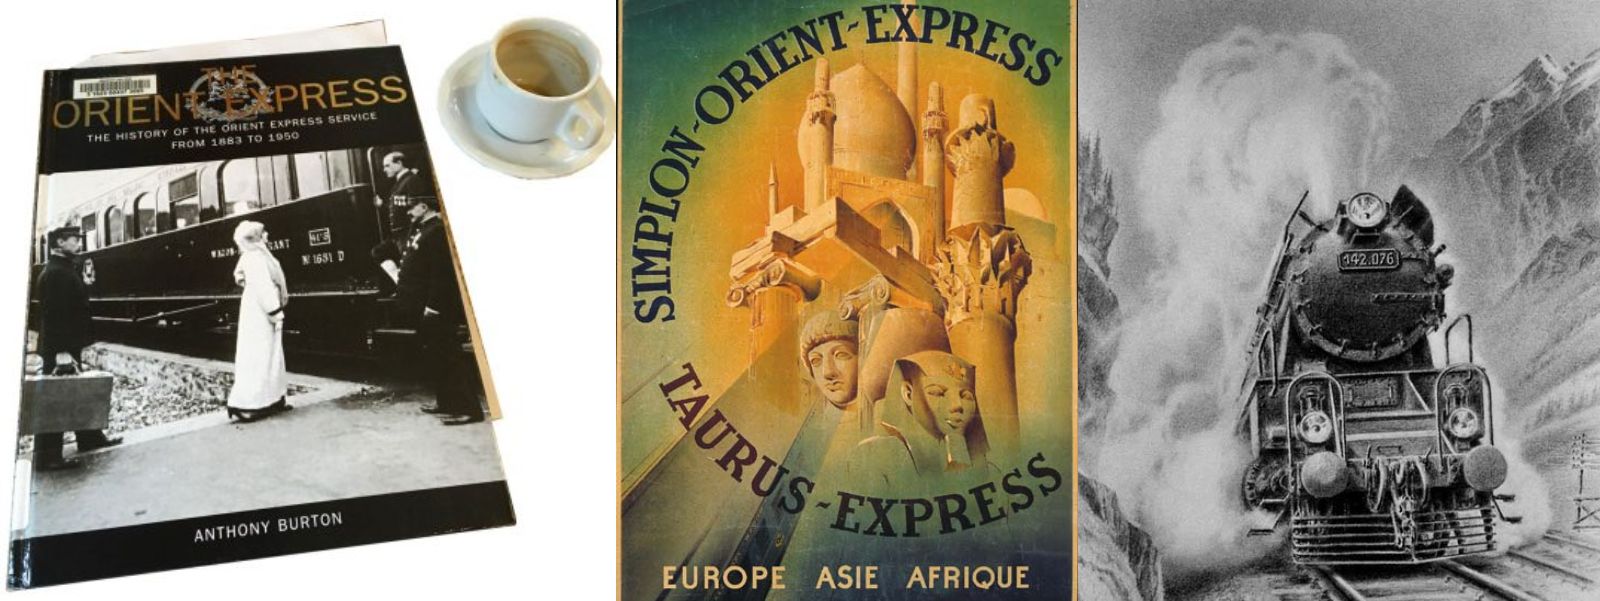 images easyblog articles 6706 ORIENT EXPRESS HISTORY 317a1b29